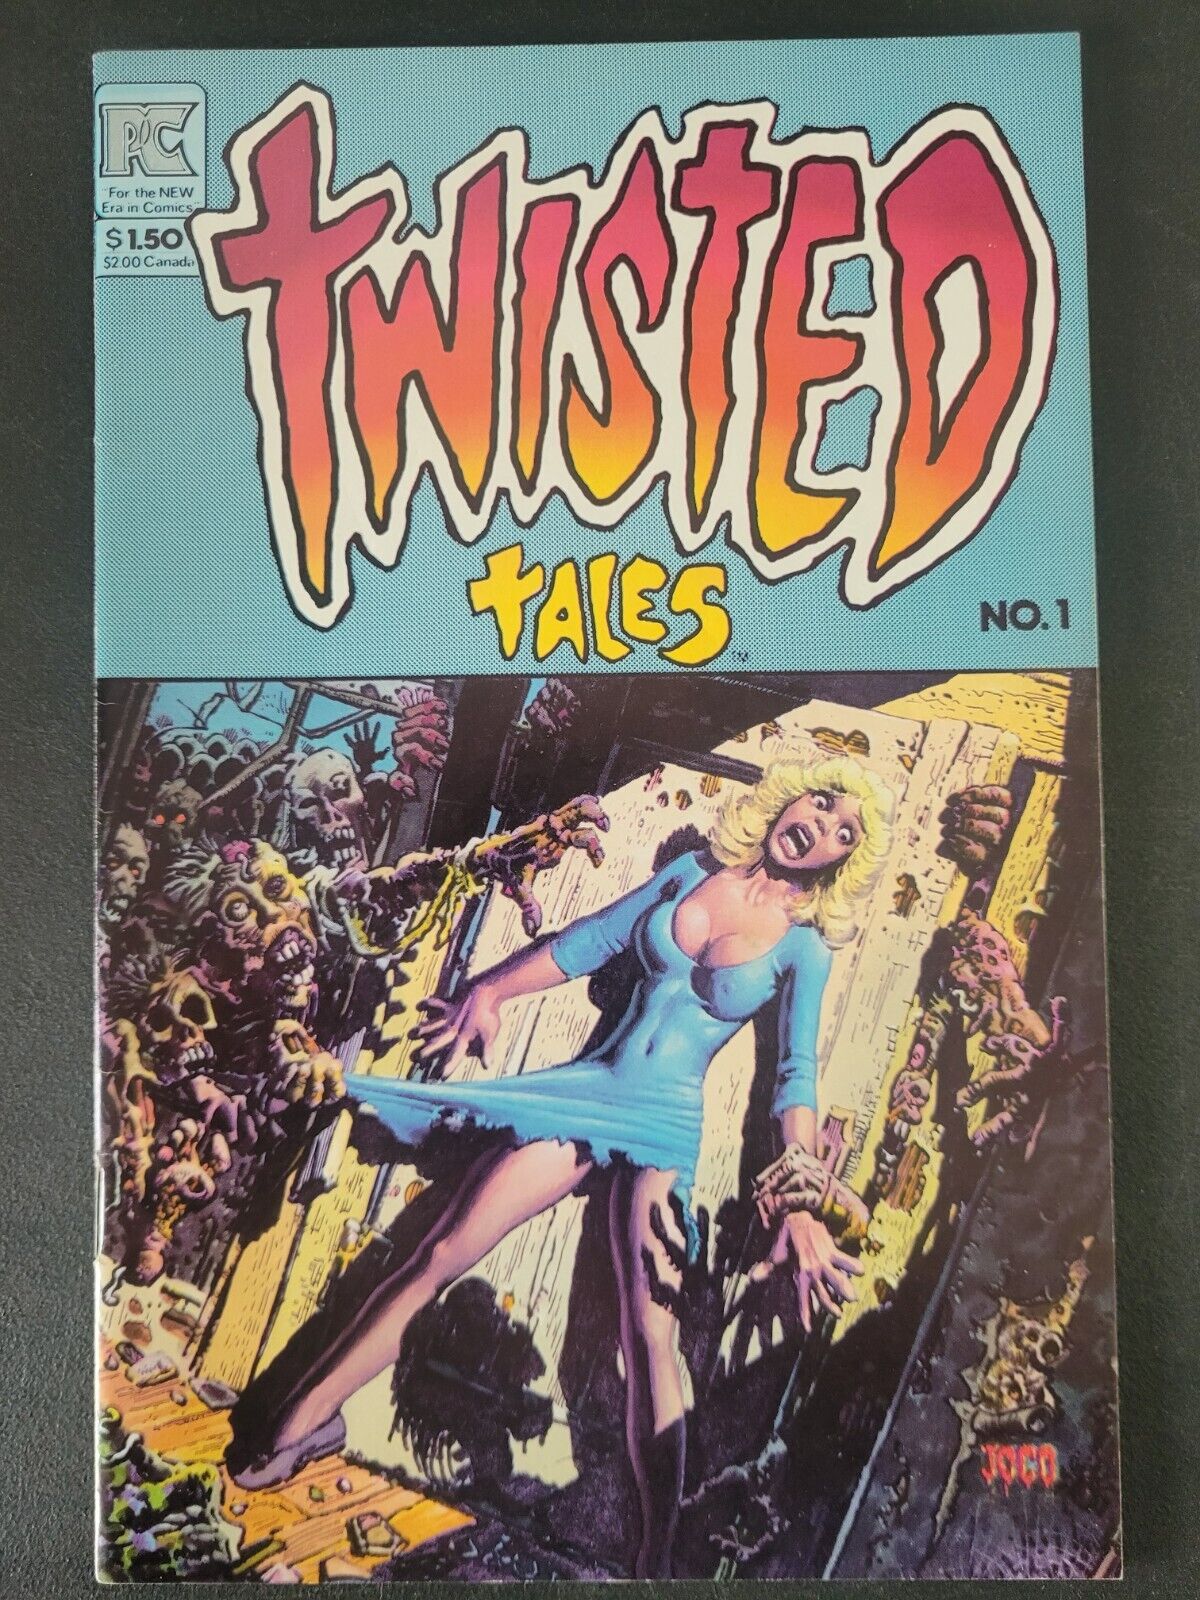 TWISTED TALES #1 (1982) PACIFIC COMICS HORROR ANTHOLOGY RICHARD CORBEN